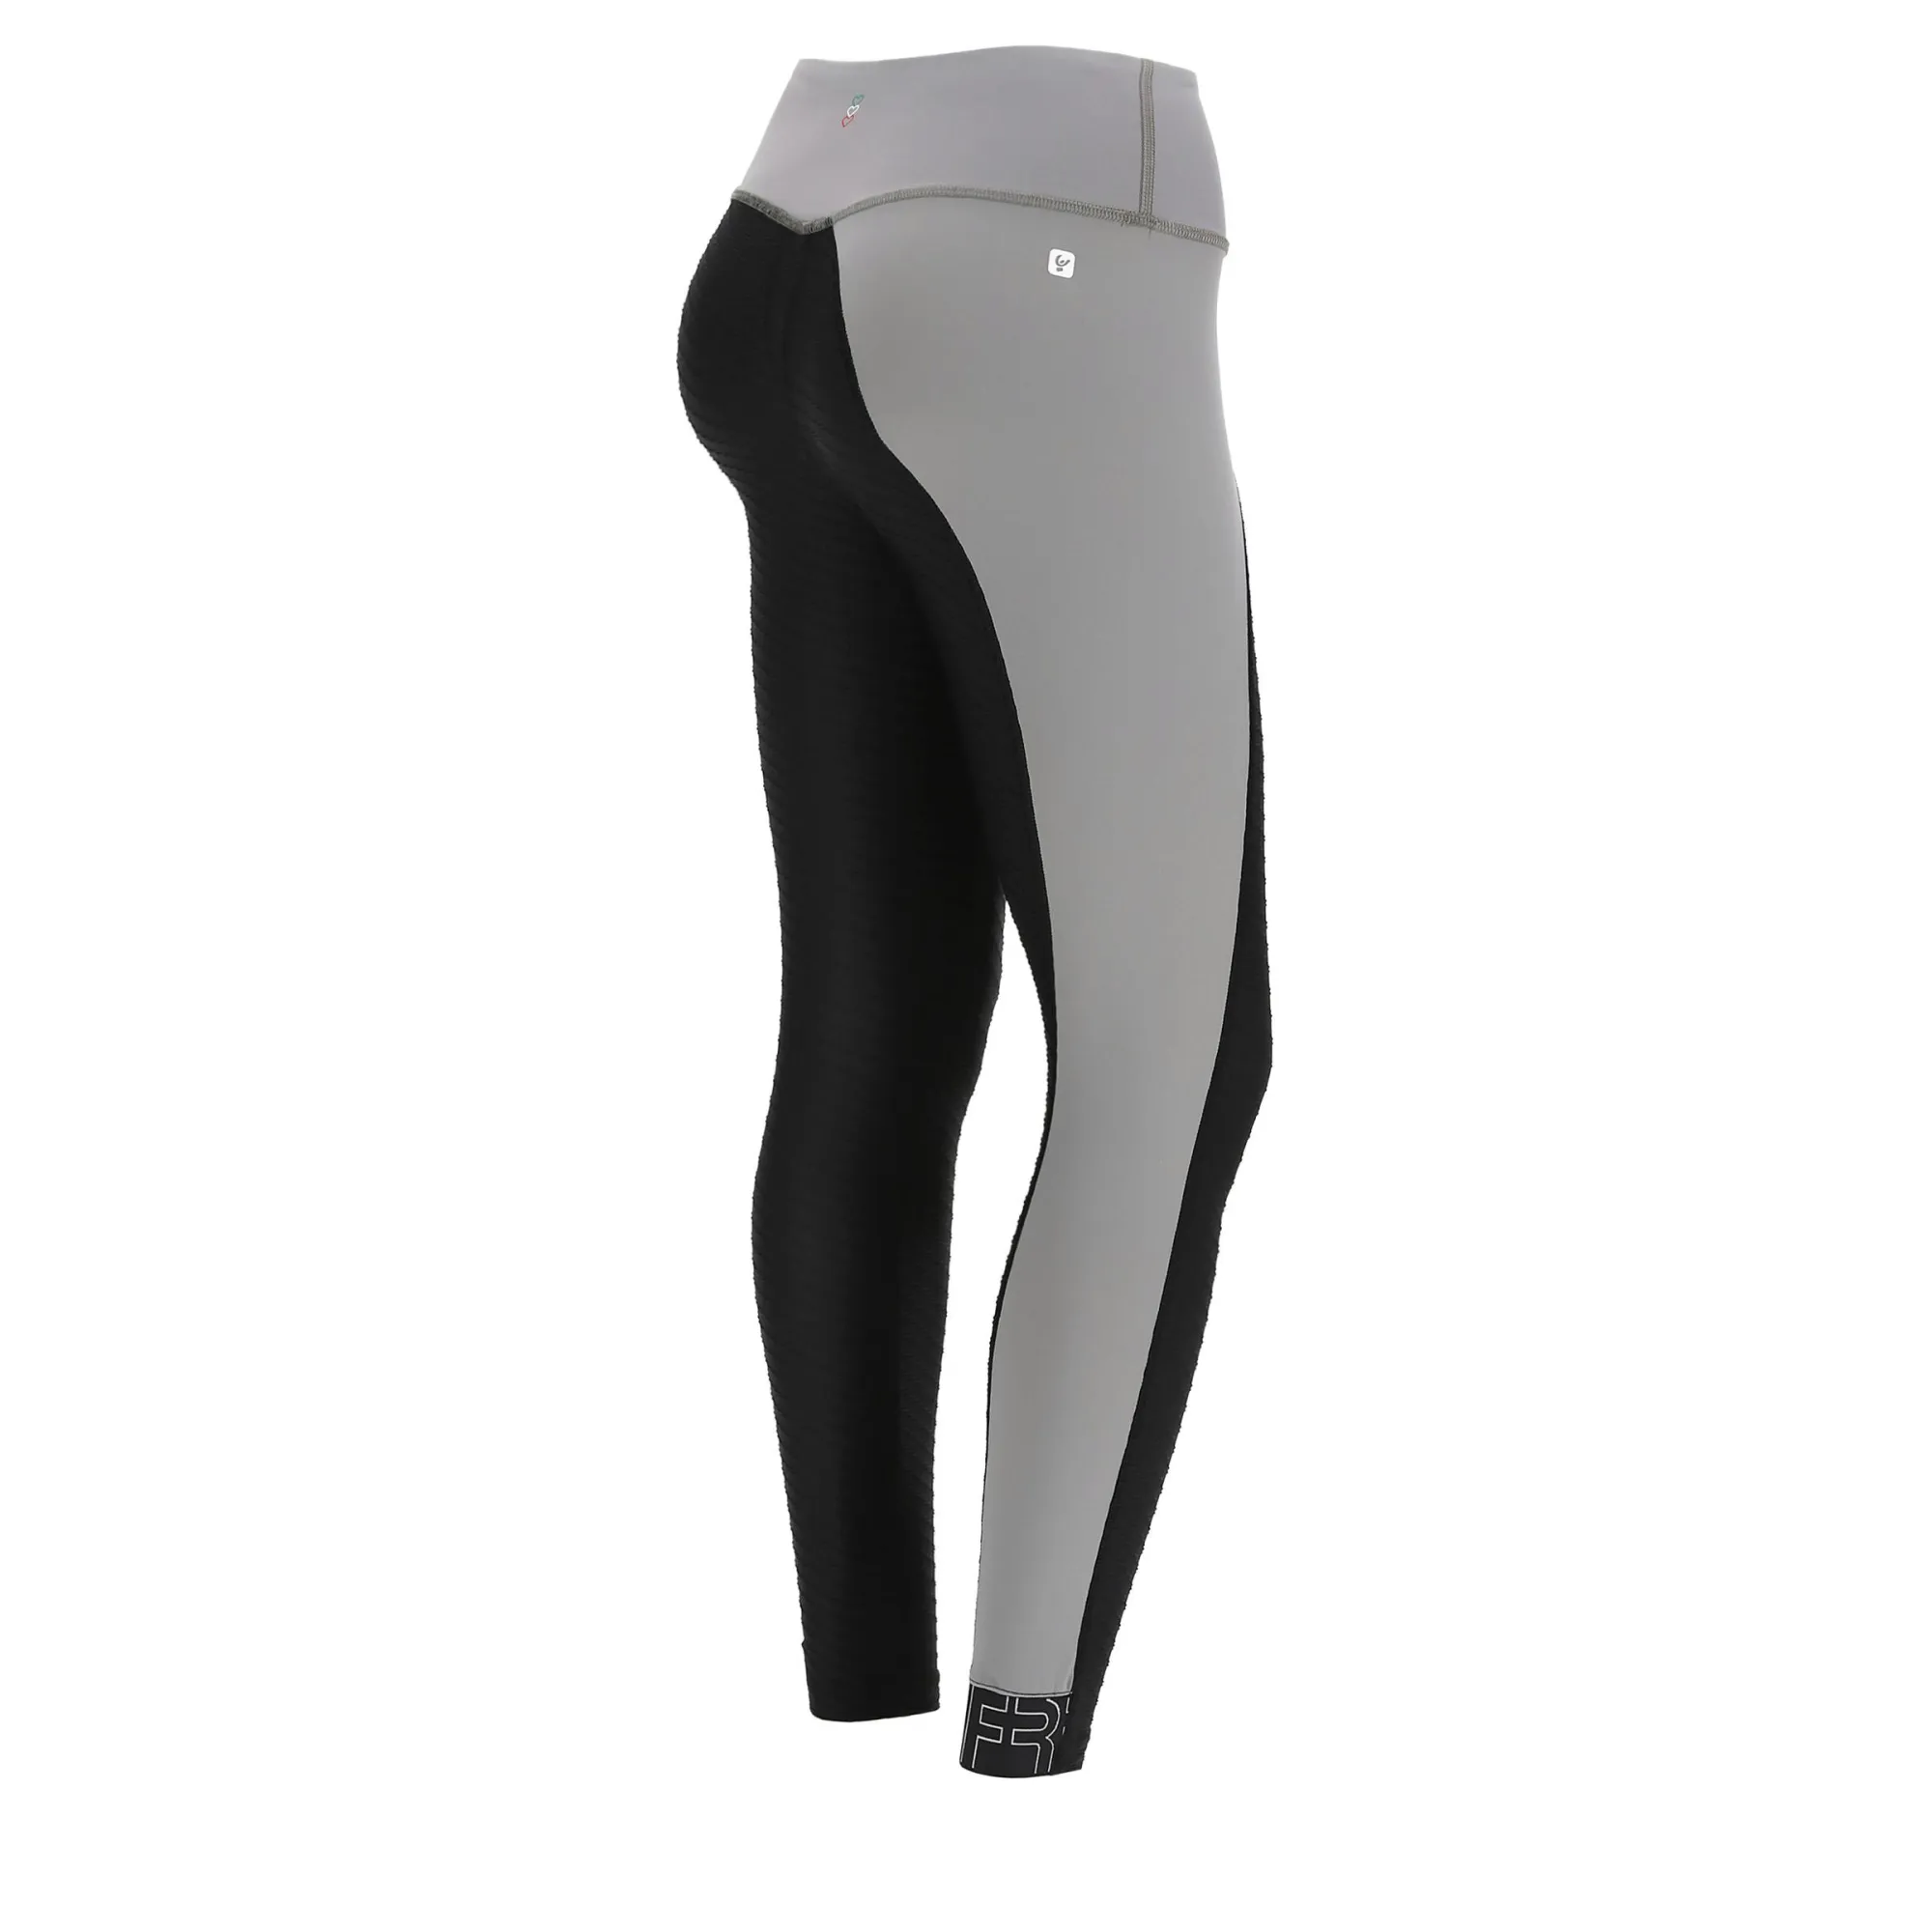 Leggings SUPERFIT - 7/8 - Made in Italy - Frost Grey - Black - NG370